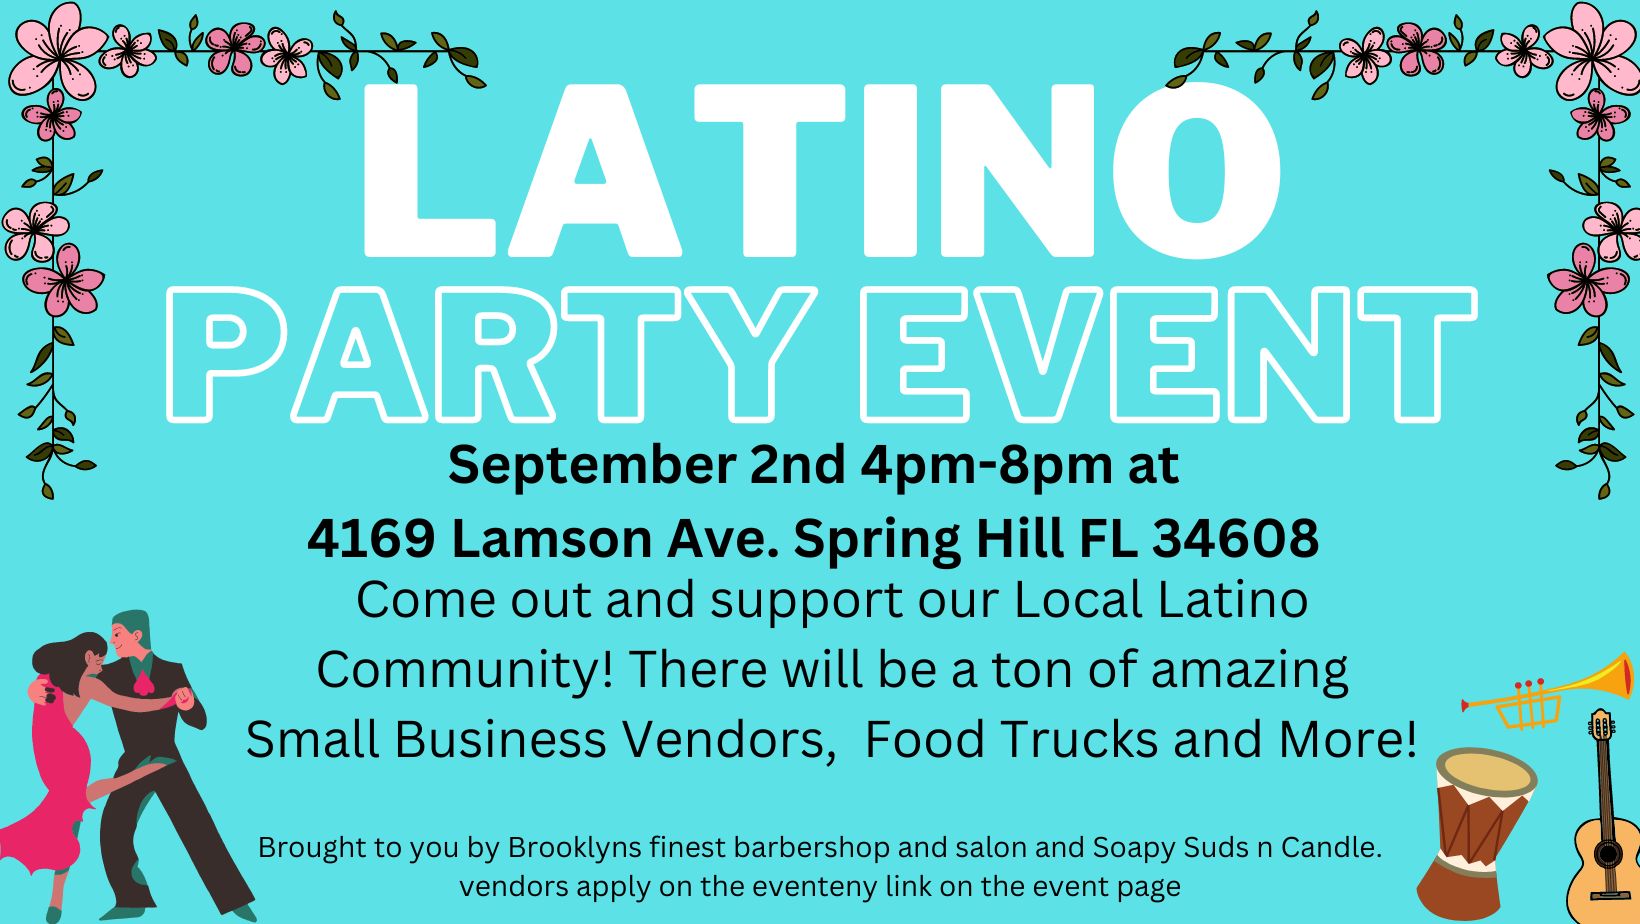 Latino Party Event!